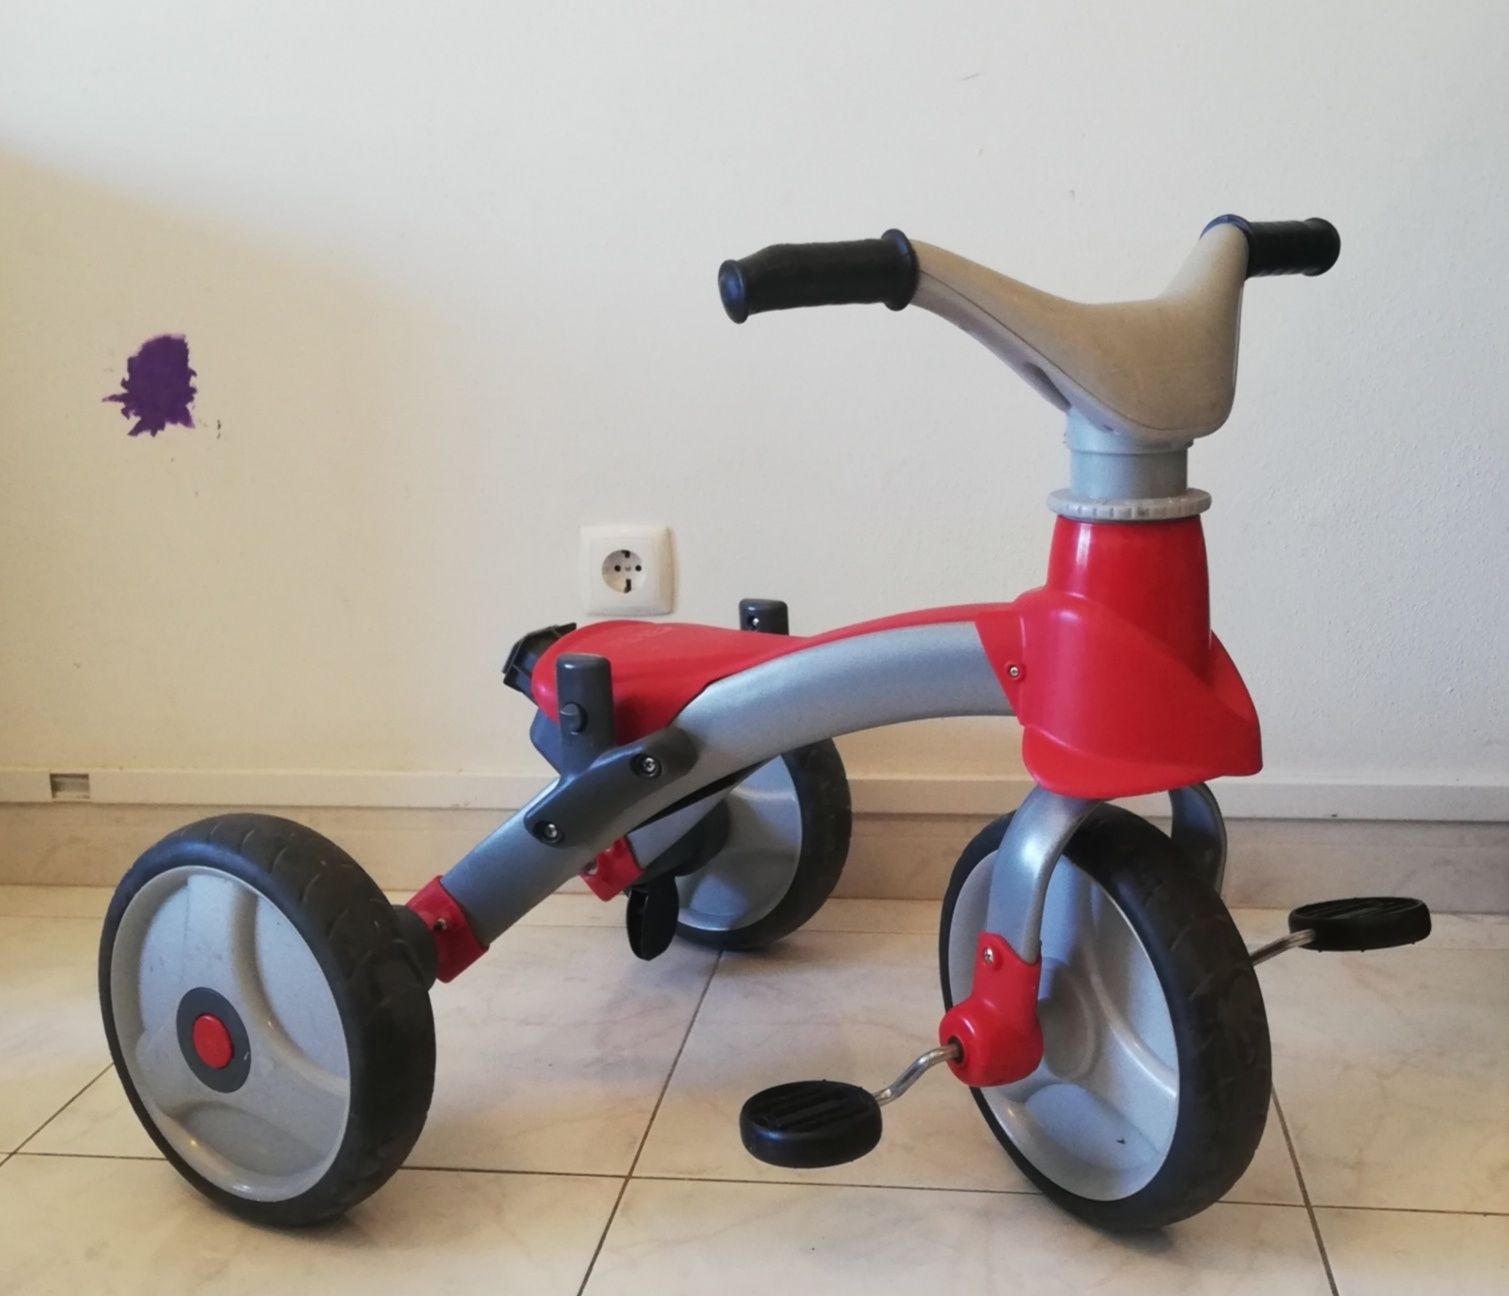 Triciclo Baby Trike 4in1